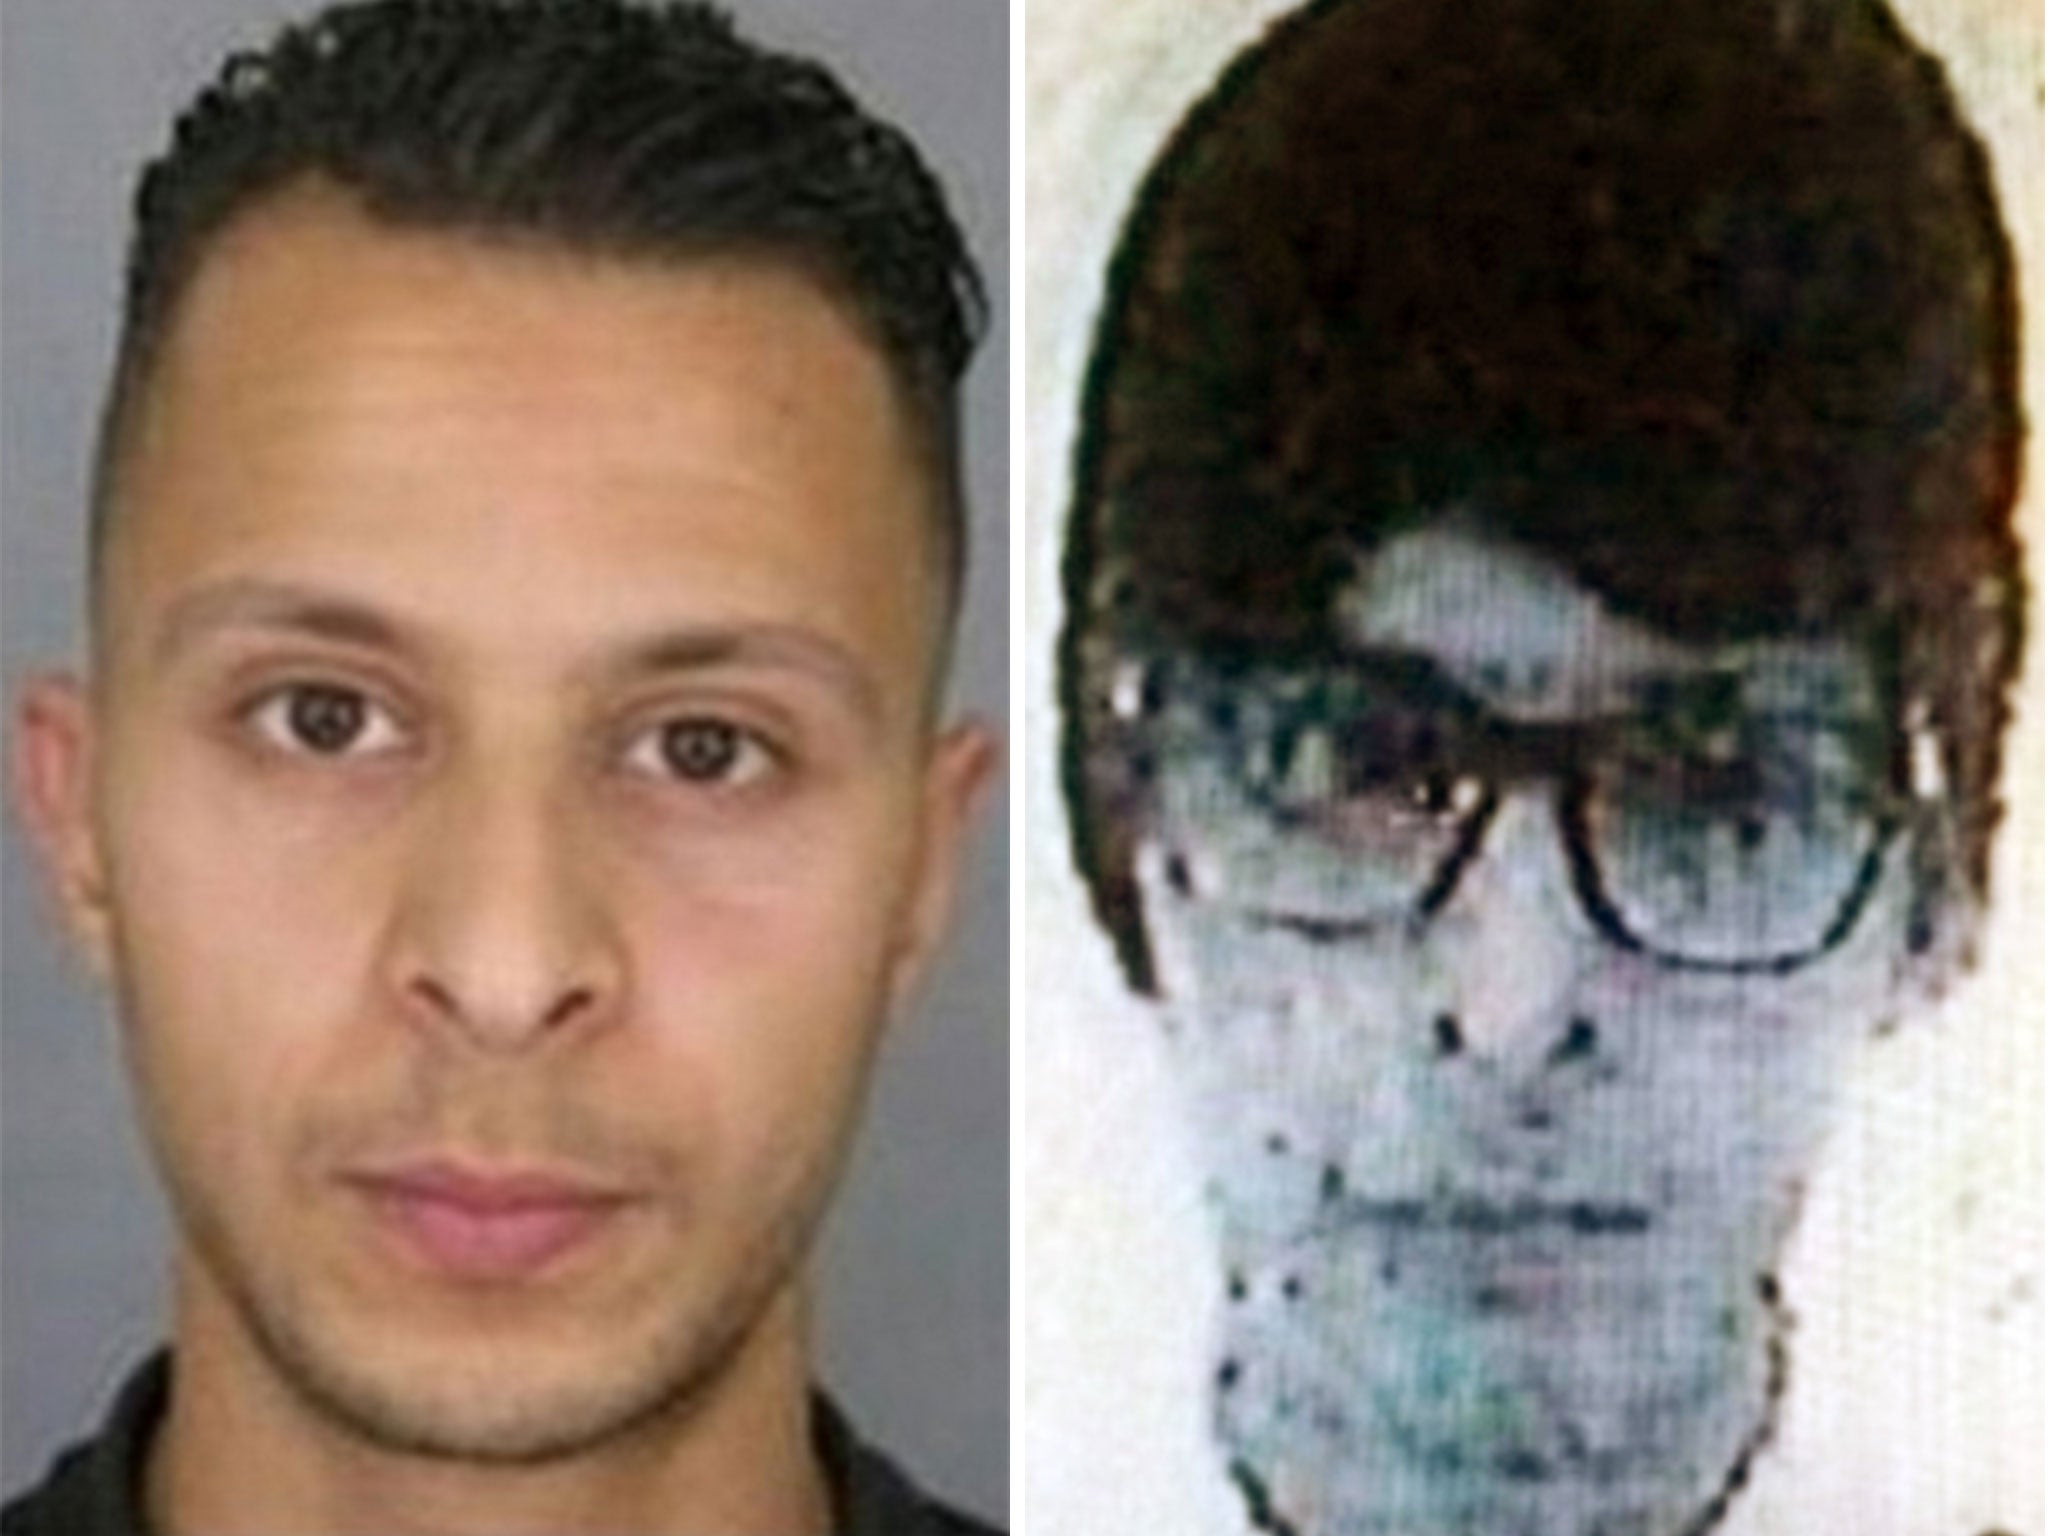 Salah Abdeslam, left, and pictured right in the disguise he was thought to be wearing following the Paris attacks, is Europe's most wanted man